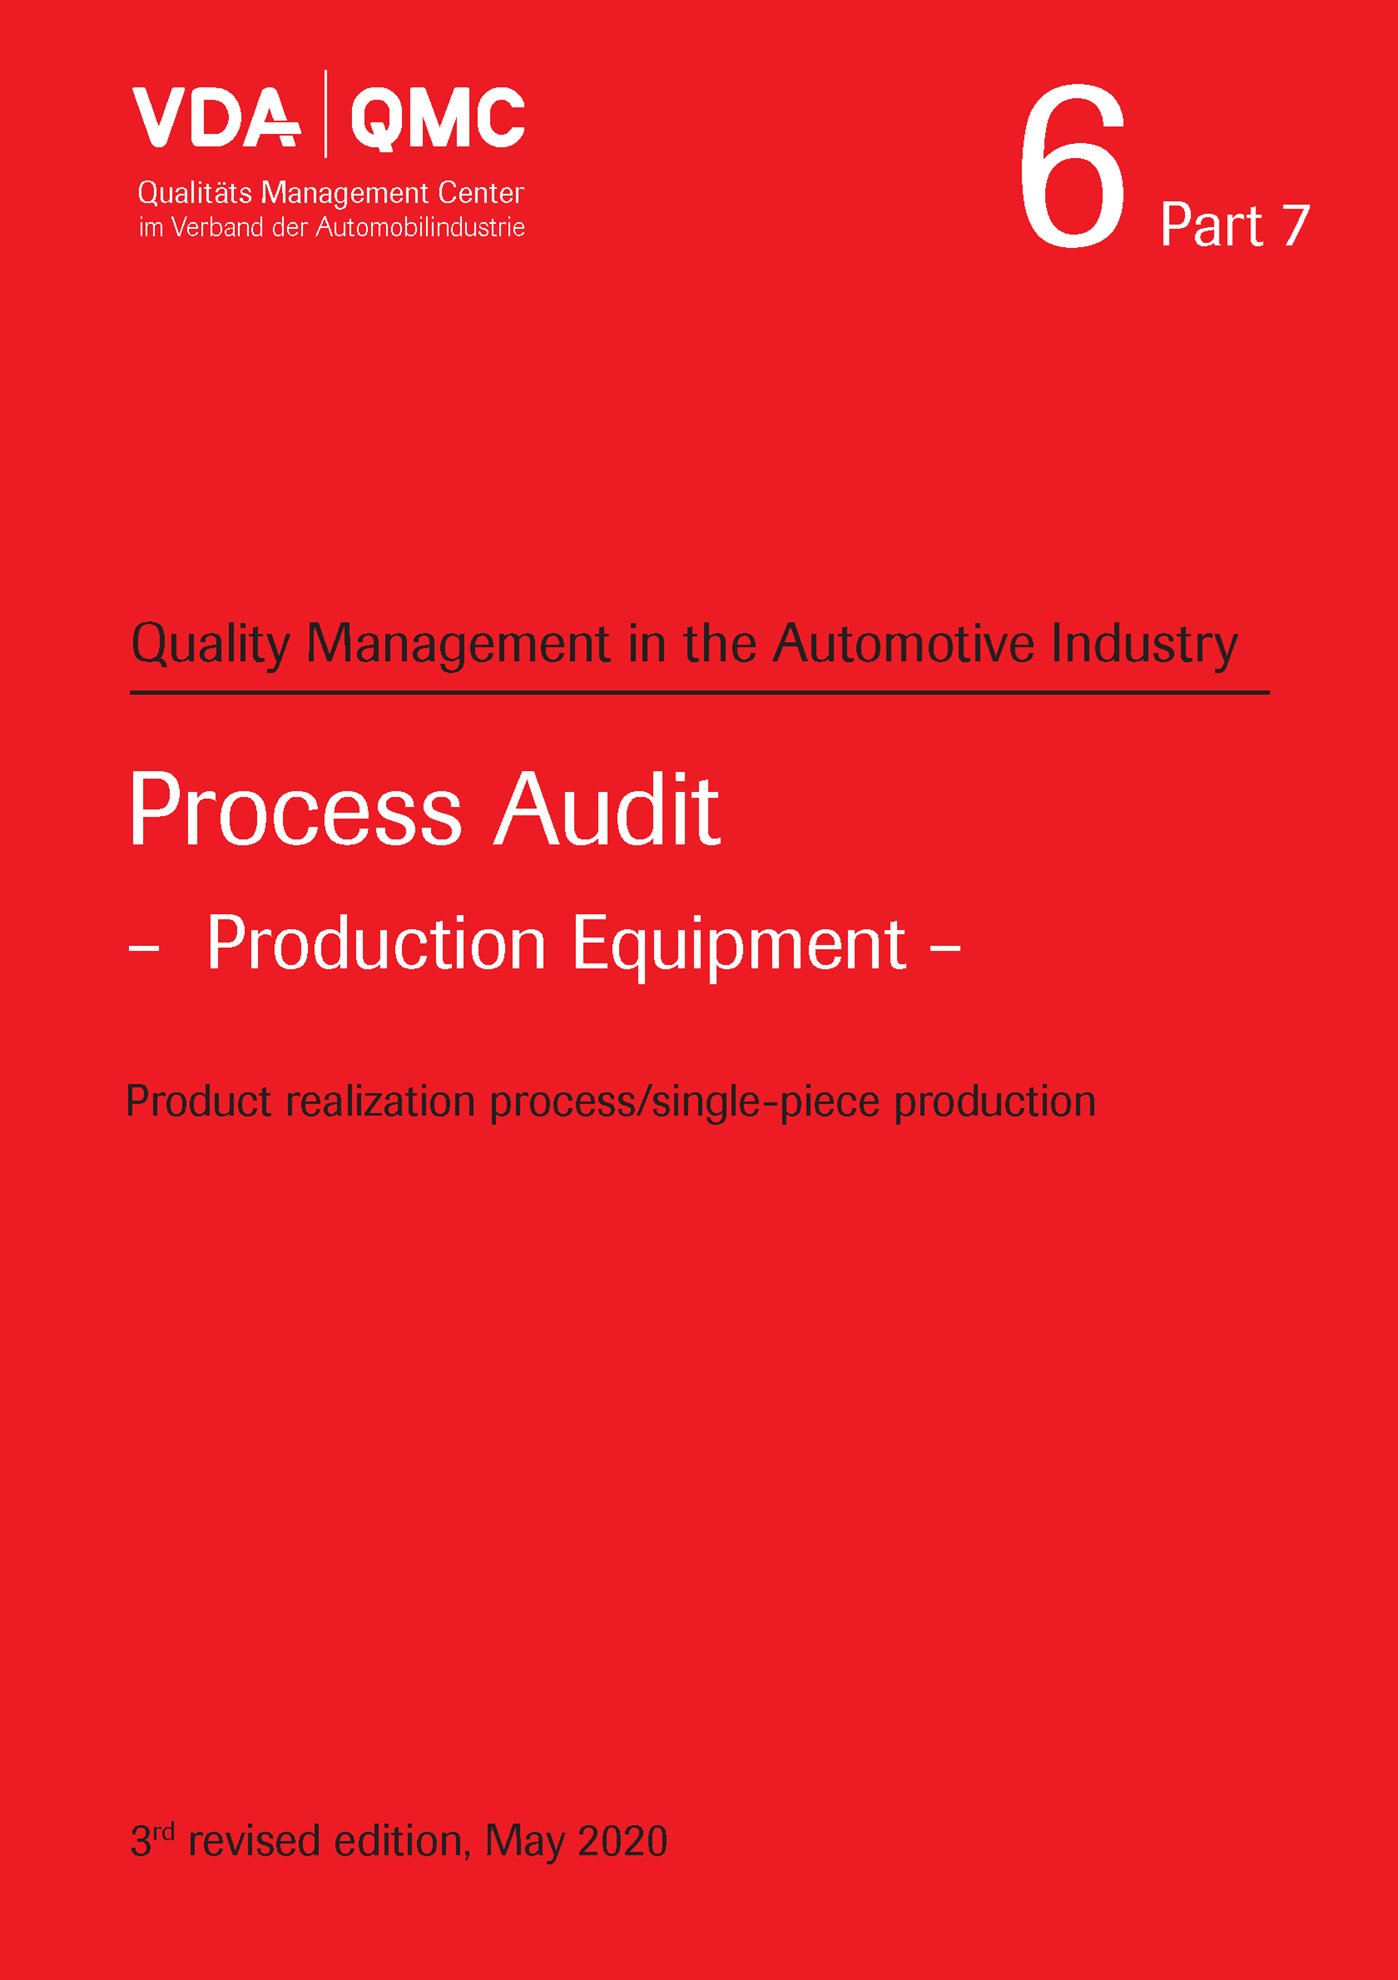 Publikation  VDA Volume 6 Part 7, Process Audit - Production Equipment, 3rd, revised edition, May 2020 1.5.2020 Ansicht